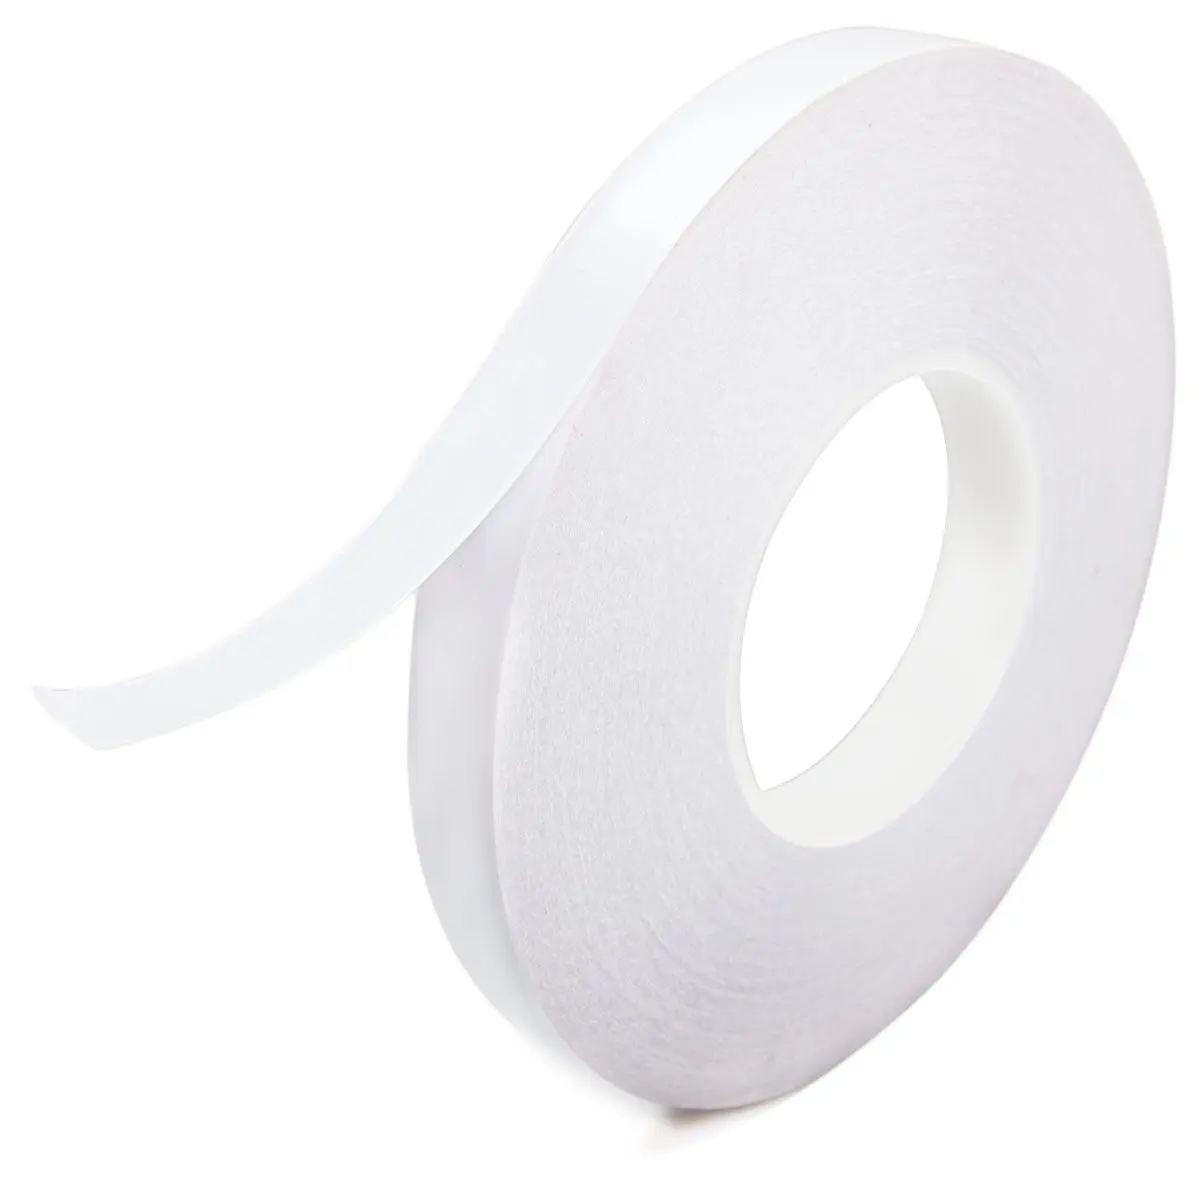 double sided adhesive tape for tile